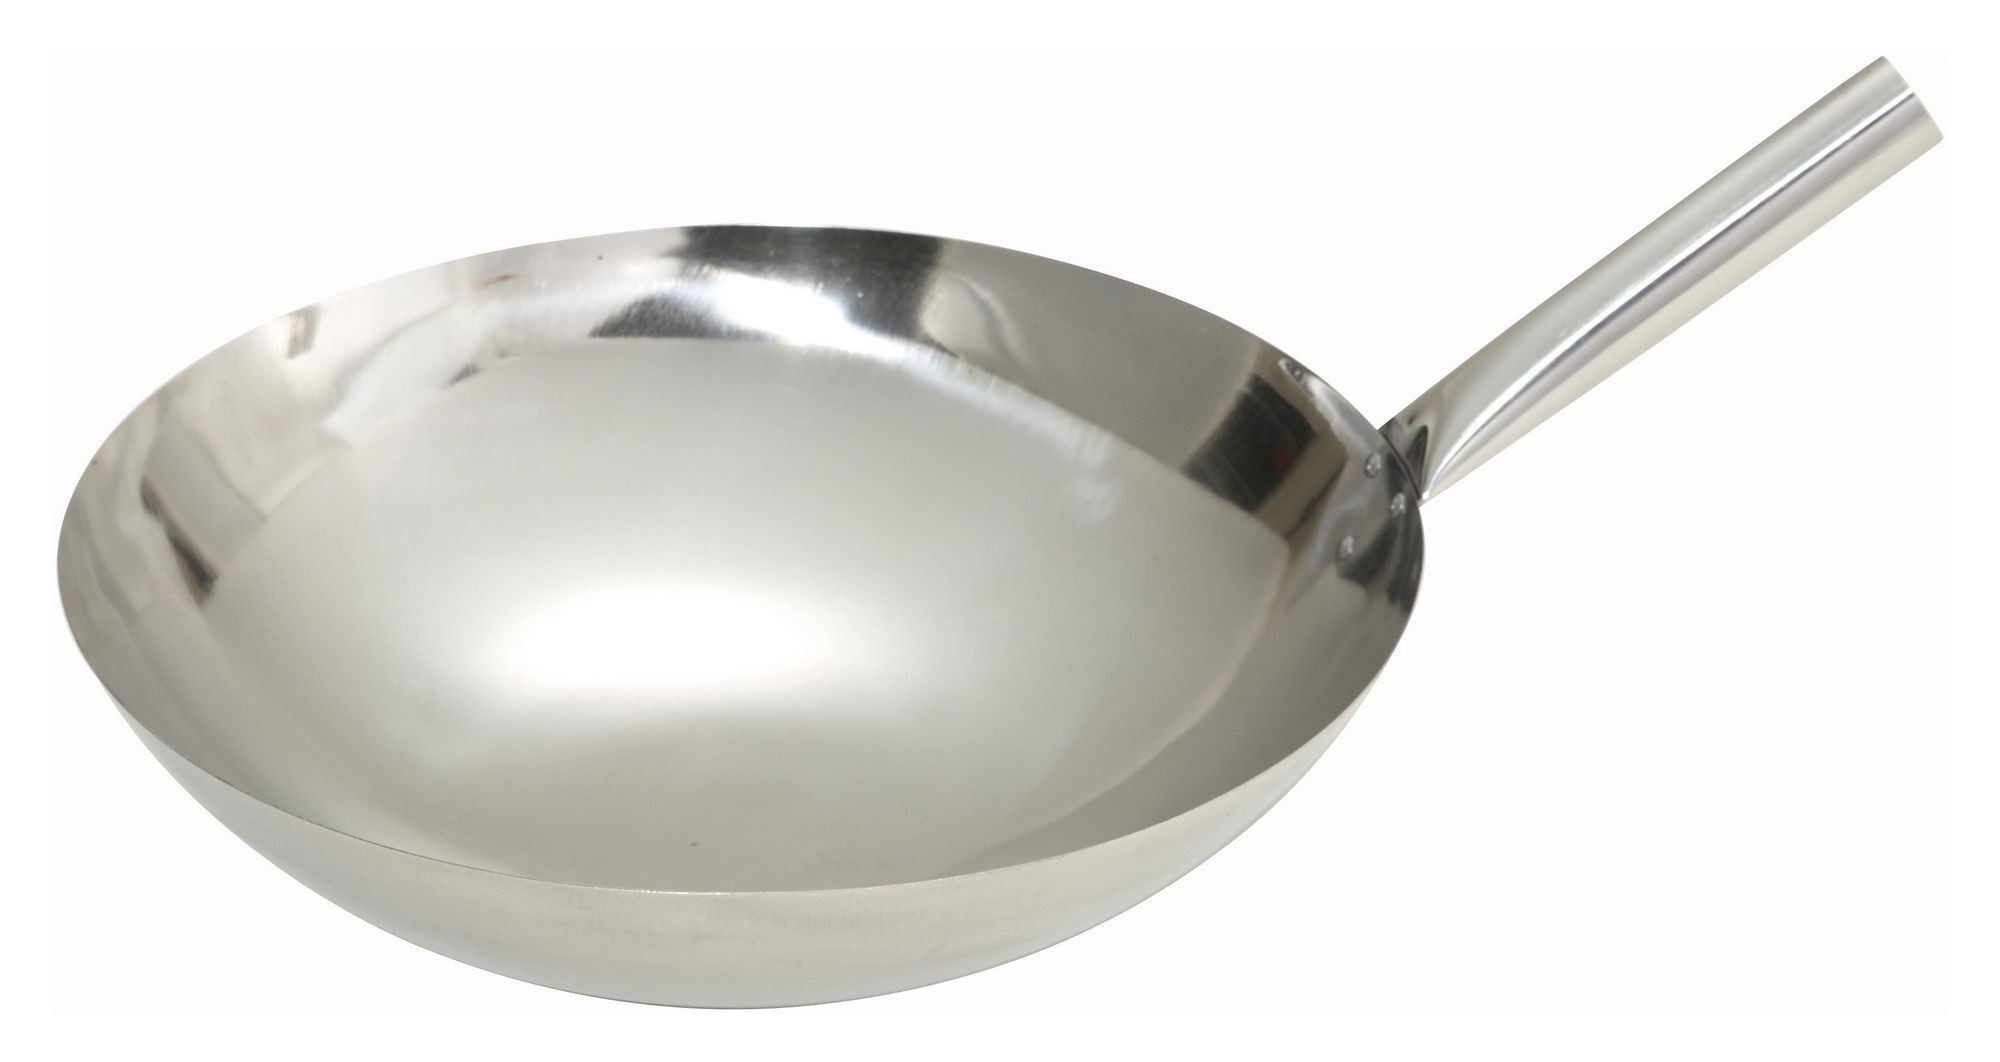 Winco WOK-16N Stainless Steel Chinese Wok with Riveted Joint 16"